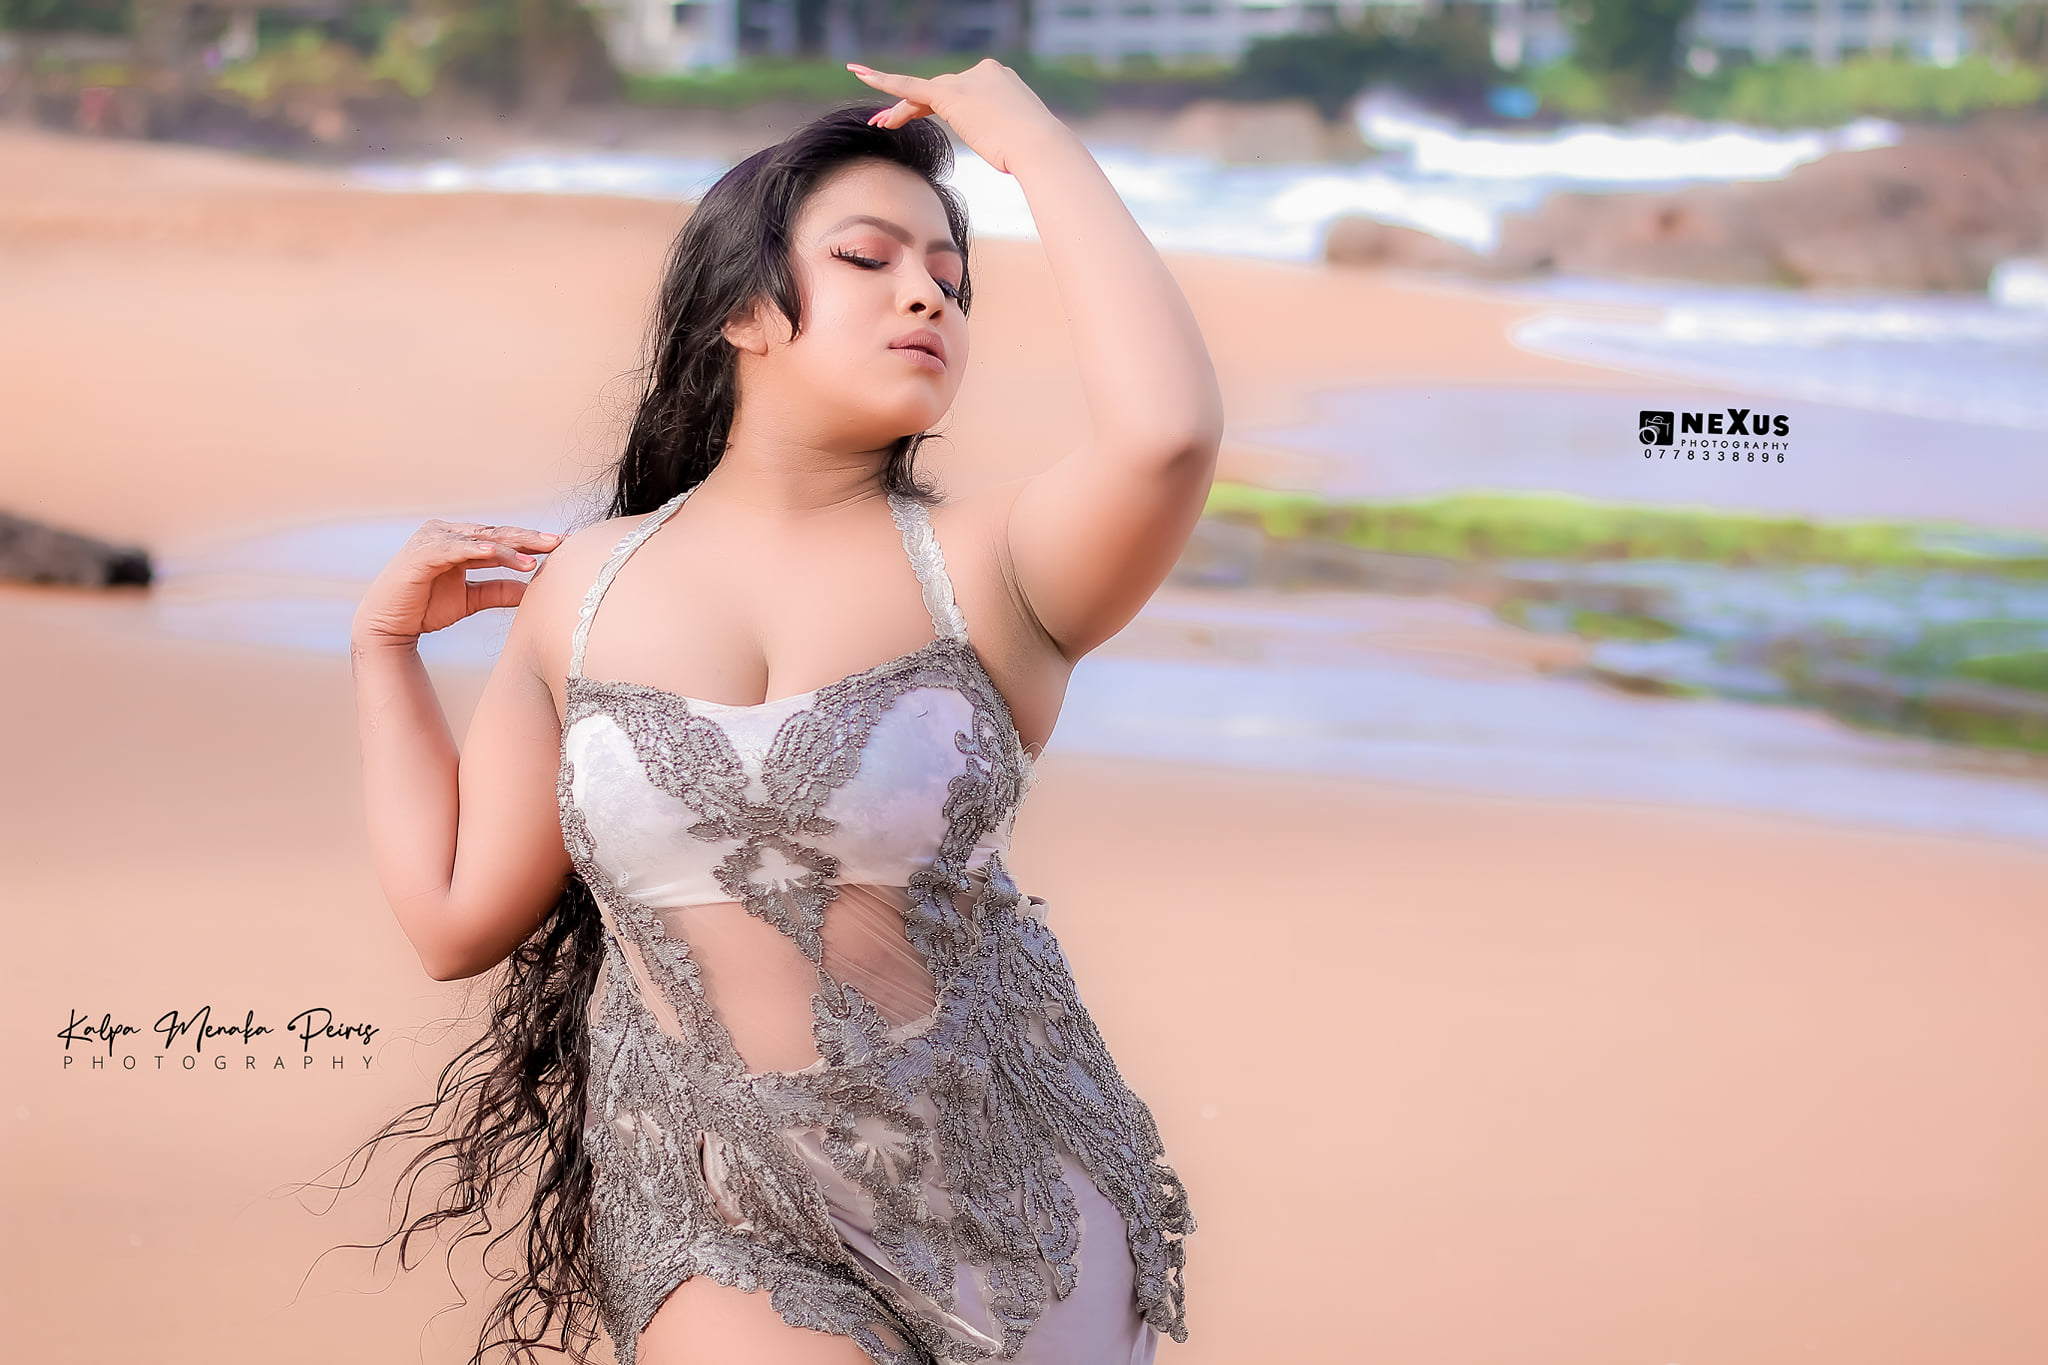 Pavithra Gamage chubby asian model hot sexy